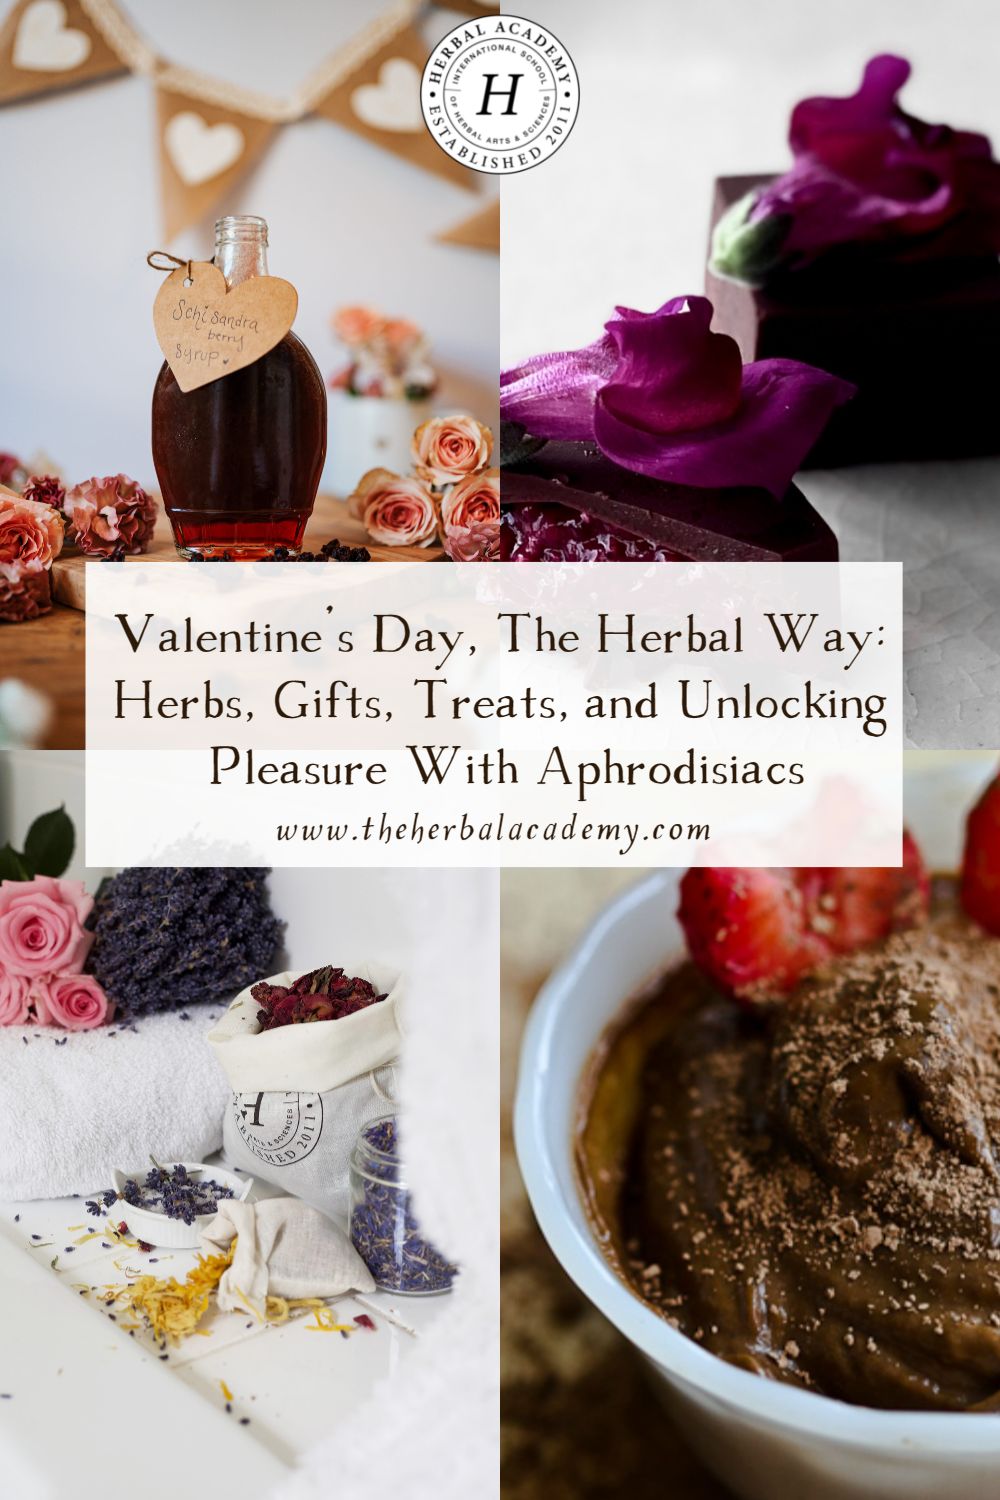 Valentine’s Day, The Herbal Way: Herbs, Gifts, Treats, and Unlocking Pleasure With Aphrodisiacs | Herbal Academy | We have pulled together ideas for an herbal Valentine’s Day that will help you uniquely express your feelings on this special occasion.